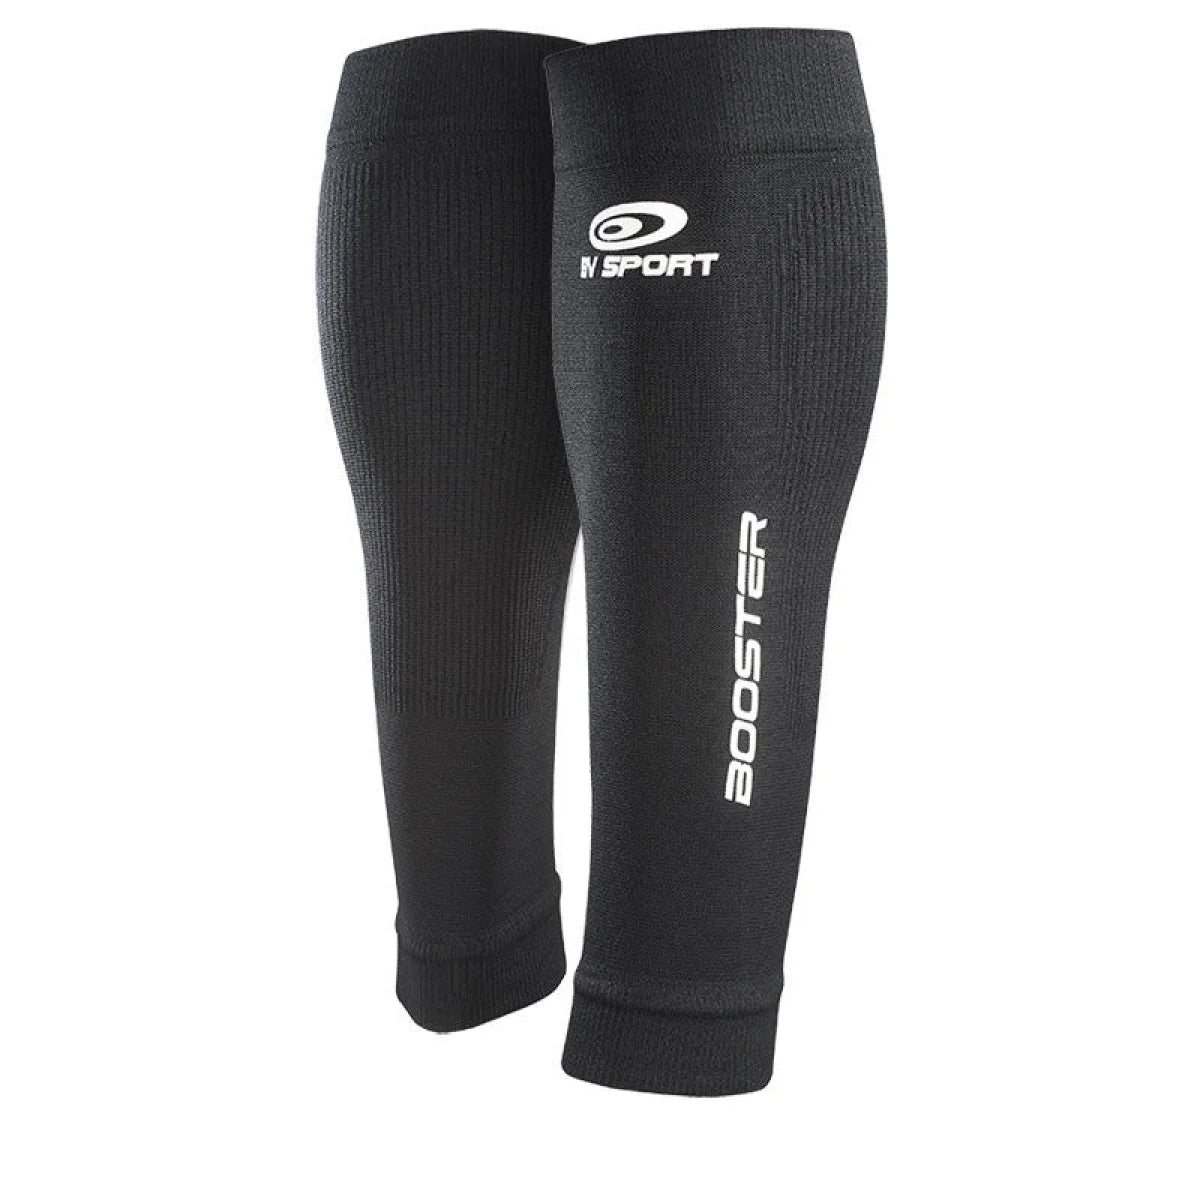 Unisex BV Sport Booster One Compression Sleeves